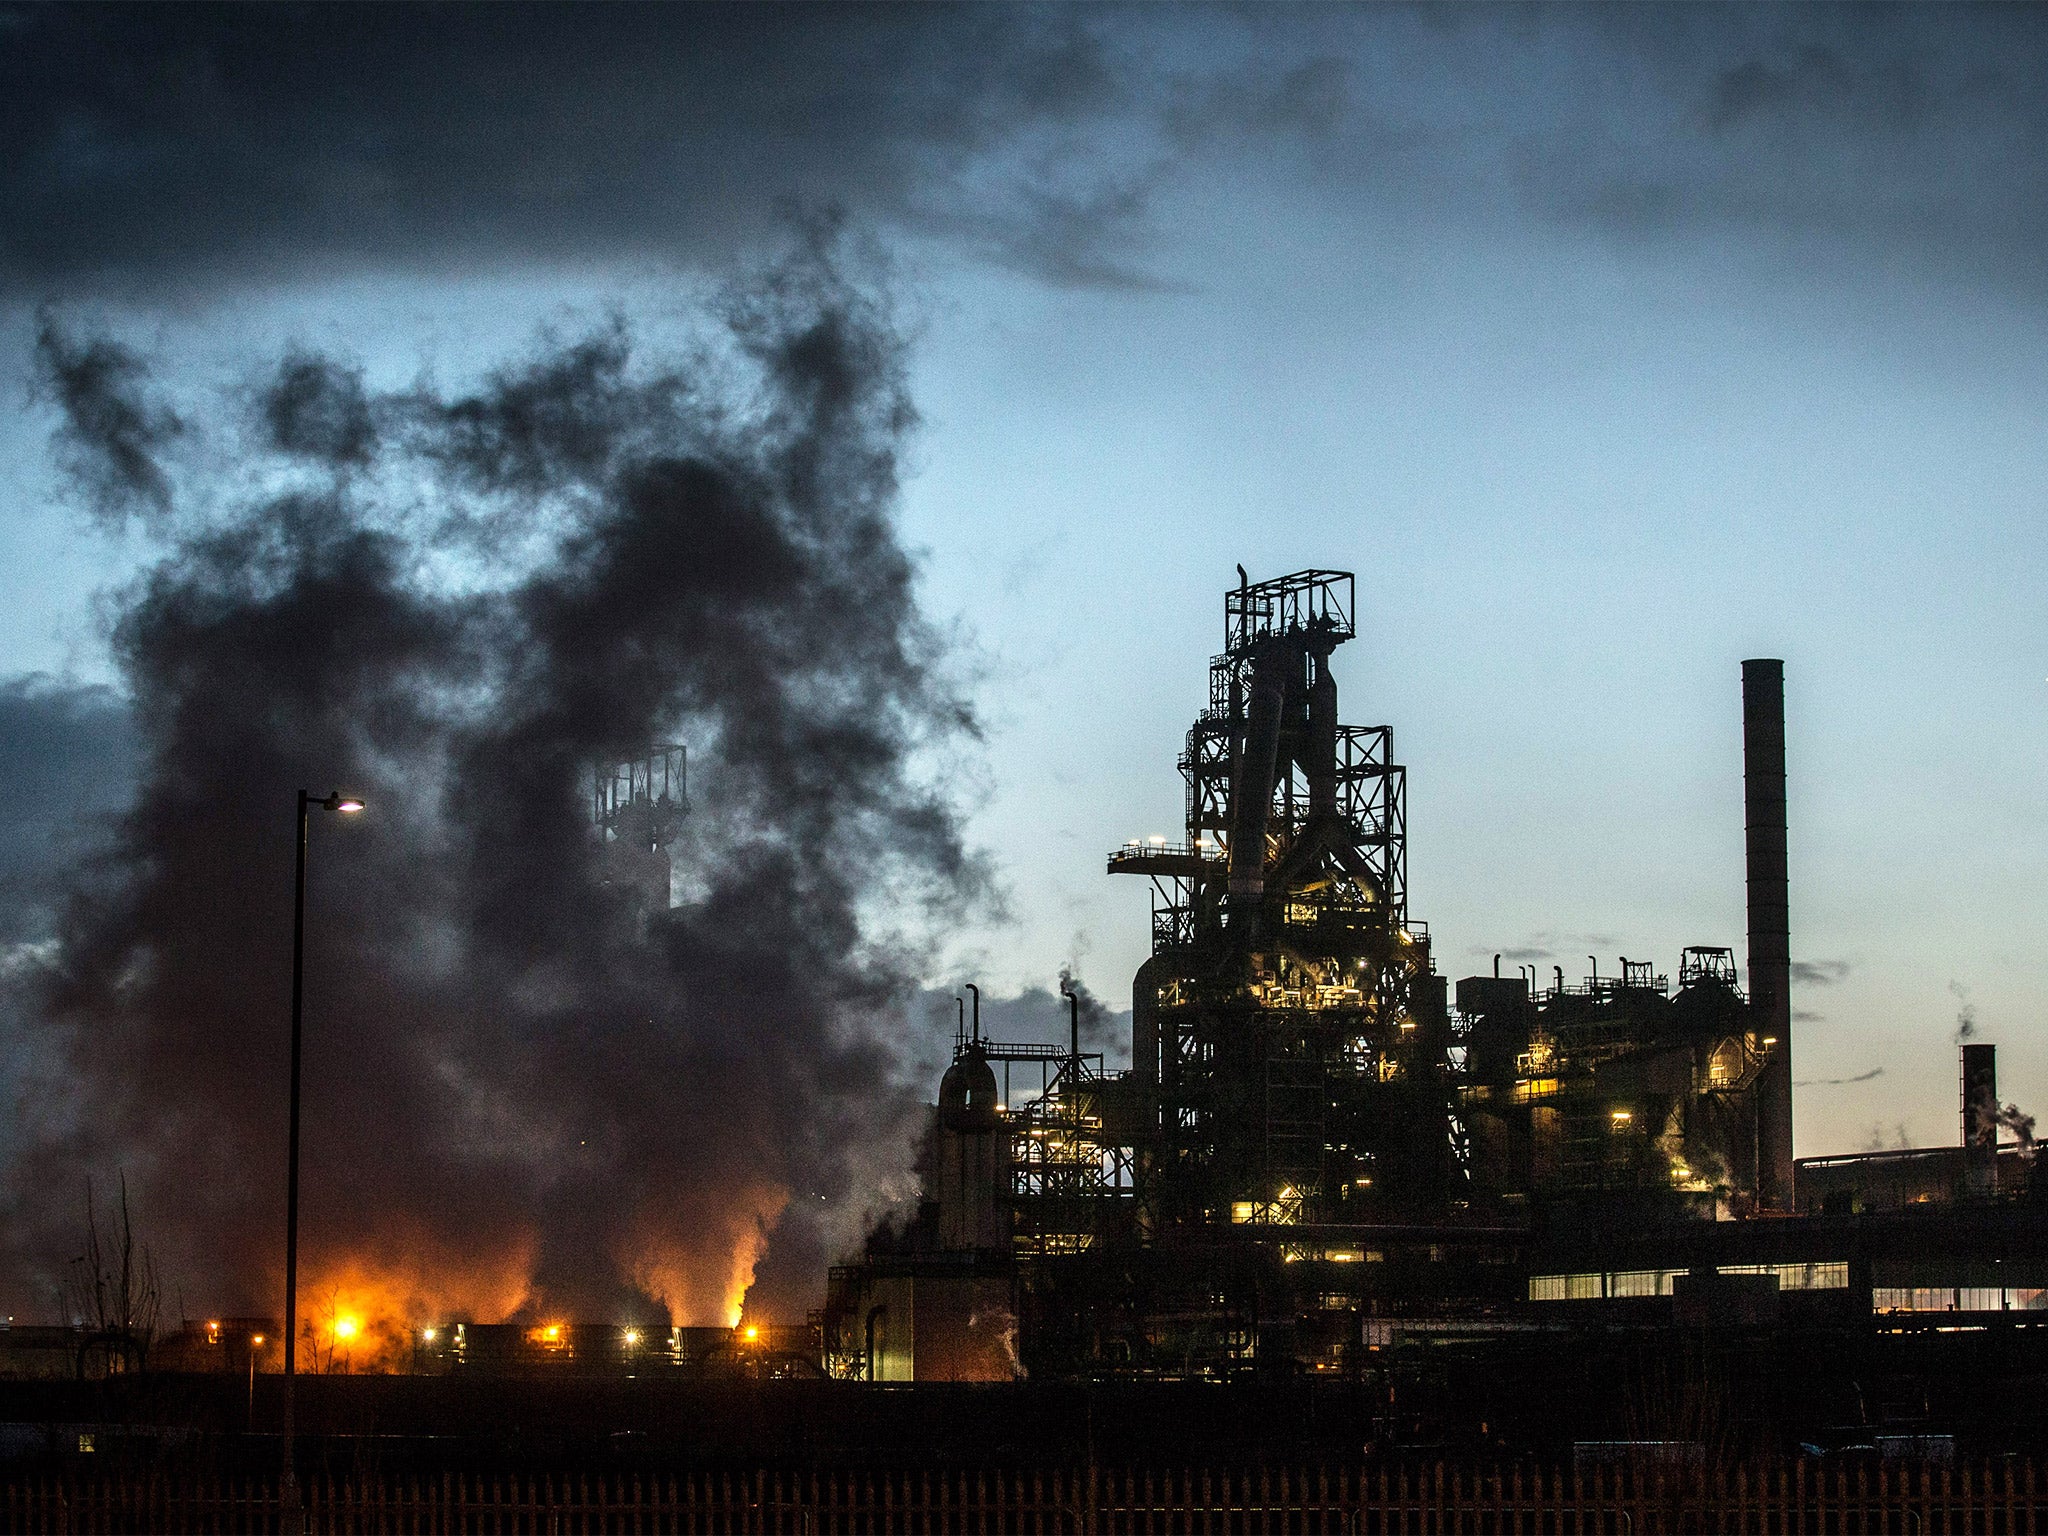 The Tata plant at Port Talbot provides employment for much of the local community.